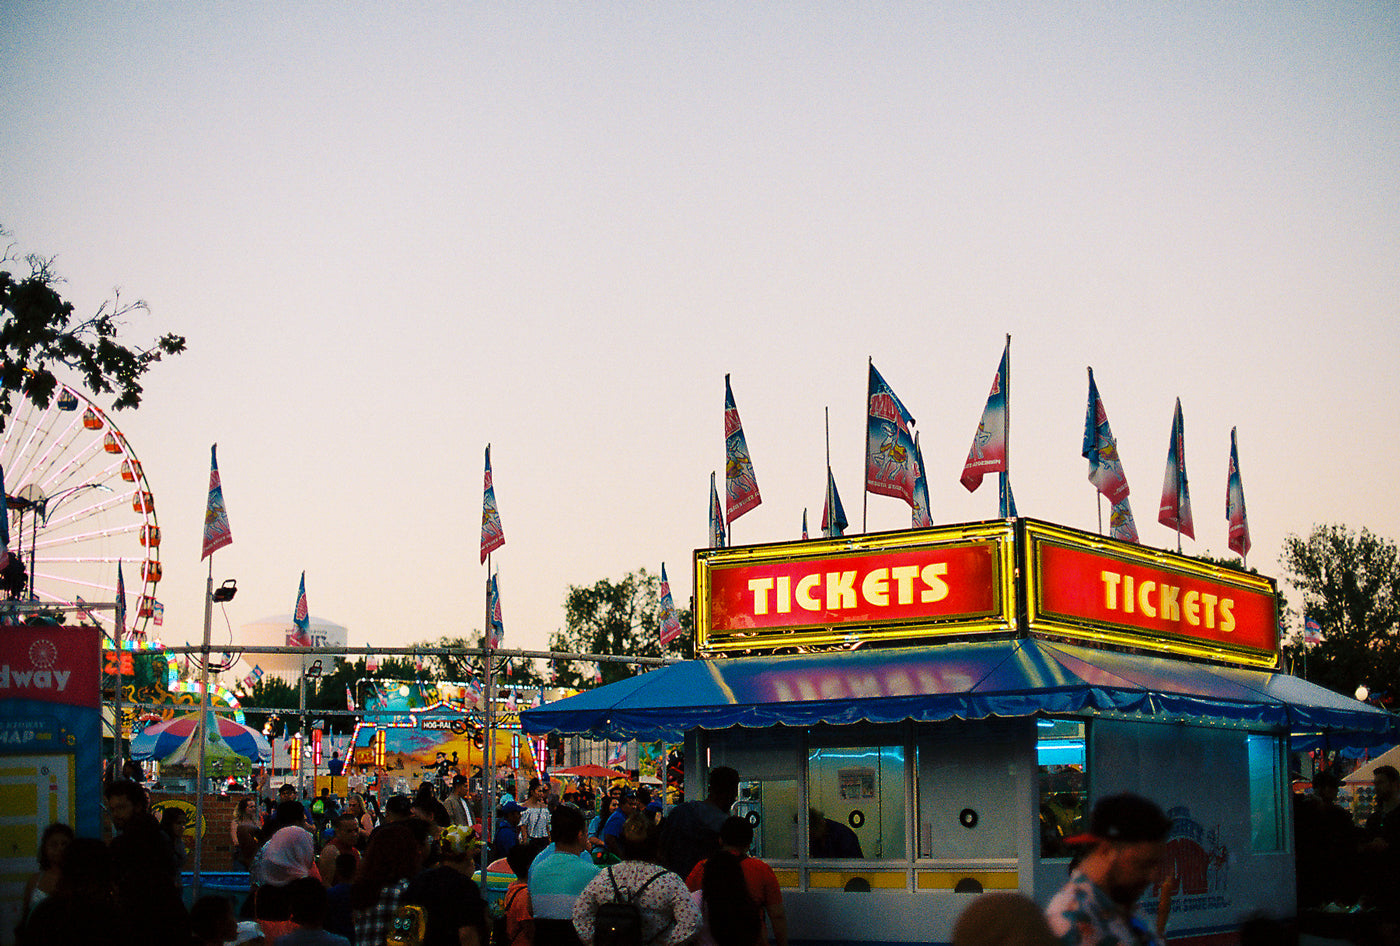 Photograph of ticket booth at a fair